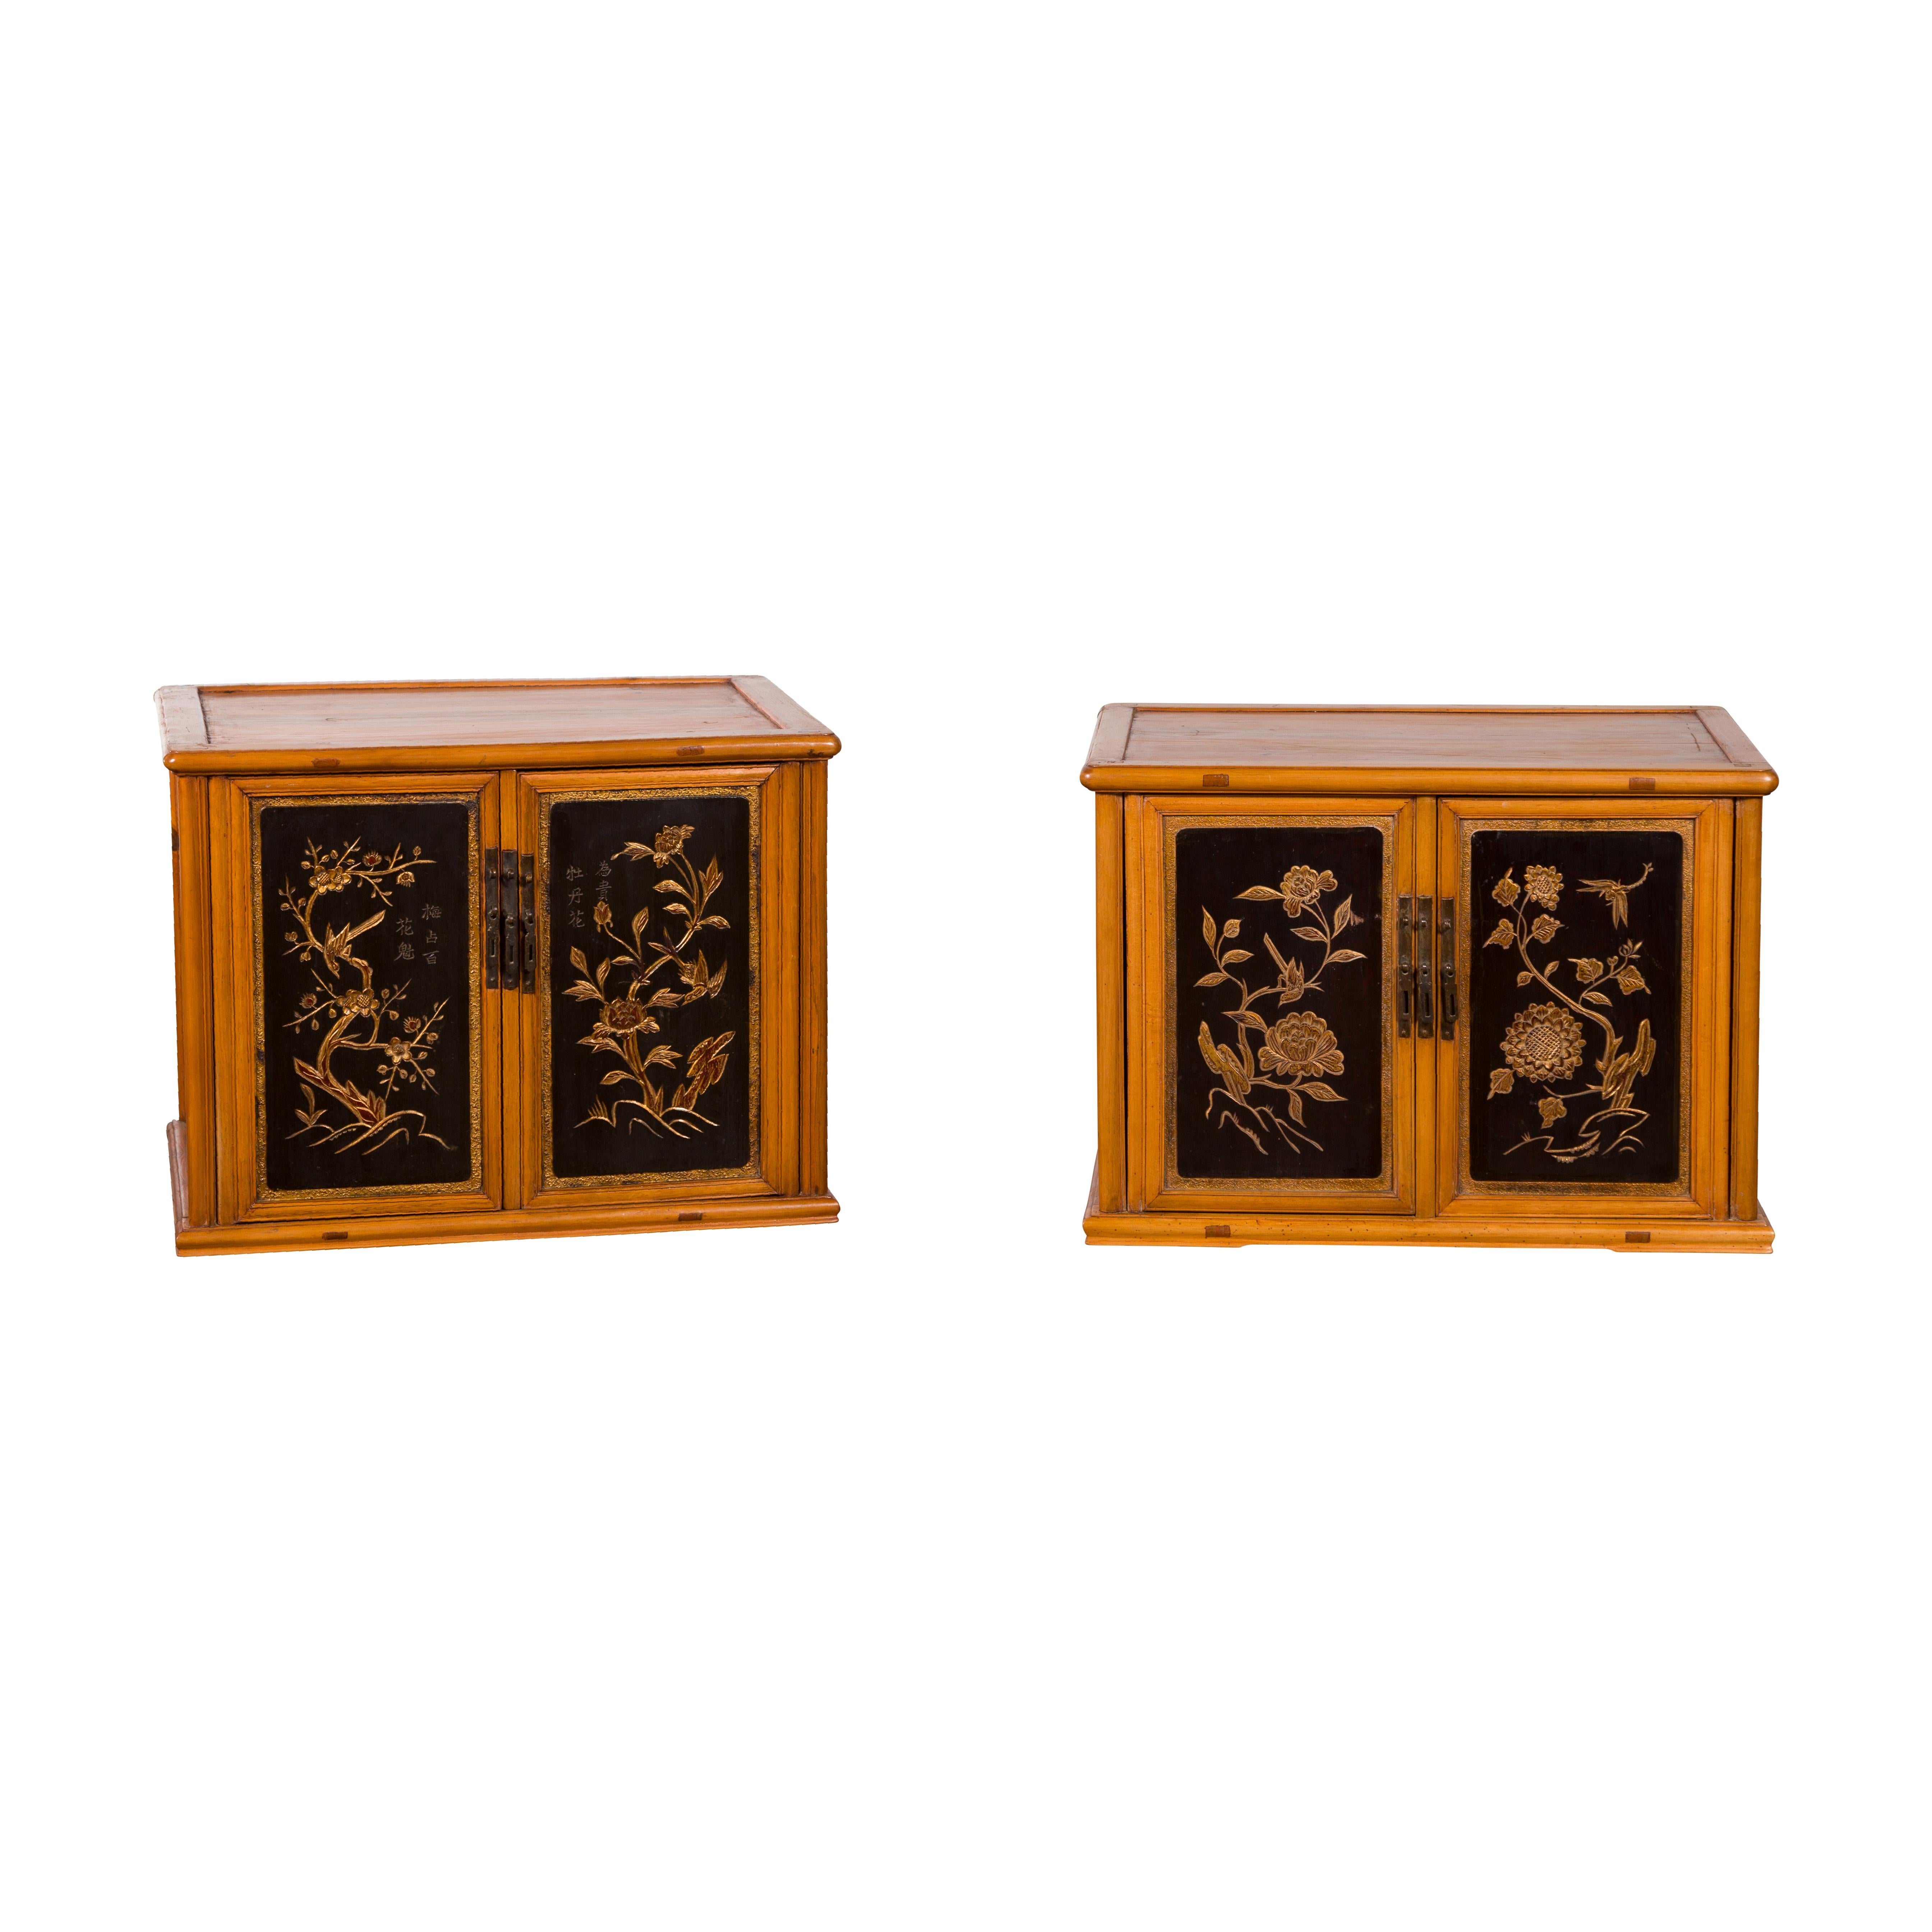 Two Chinese Qing Dynasty period fruitwood stackable side cabinets from the 19th century with carved gilt motifs, priced and sold $1,600 each. Created in China during the Qing Dynasty, each of these two cabinets features a rectangular top with